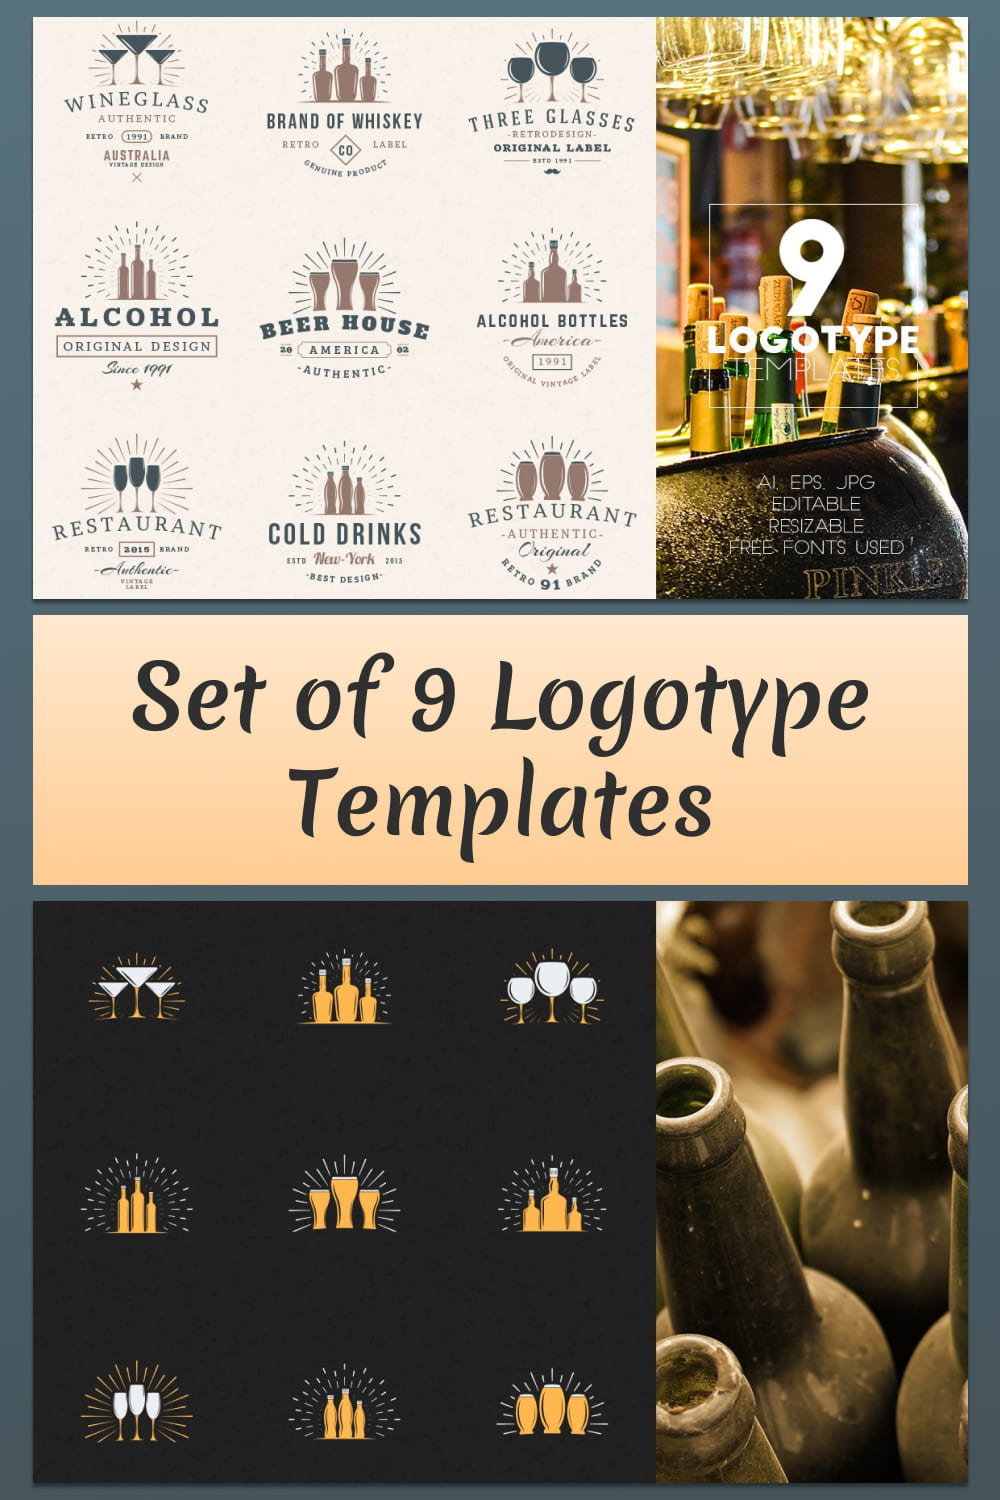 Set of 9 Logotype Templates - Pinterest Image Preview.